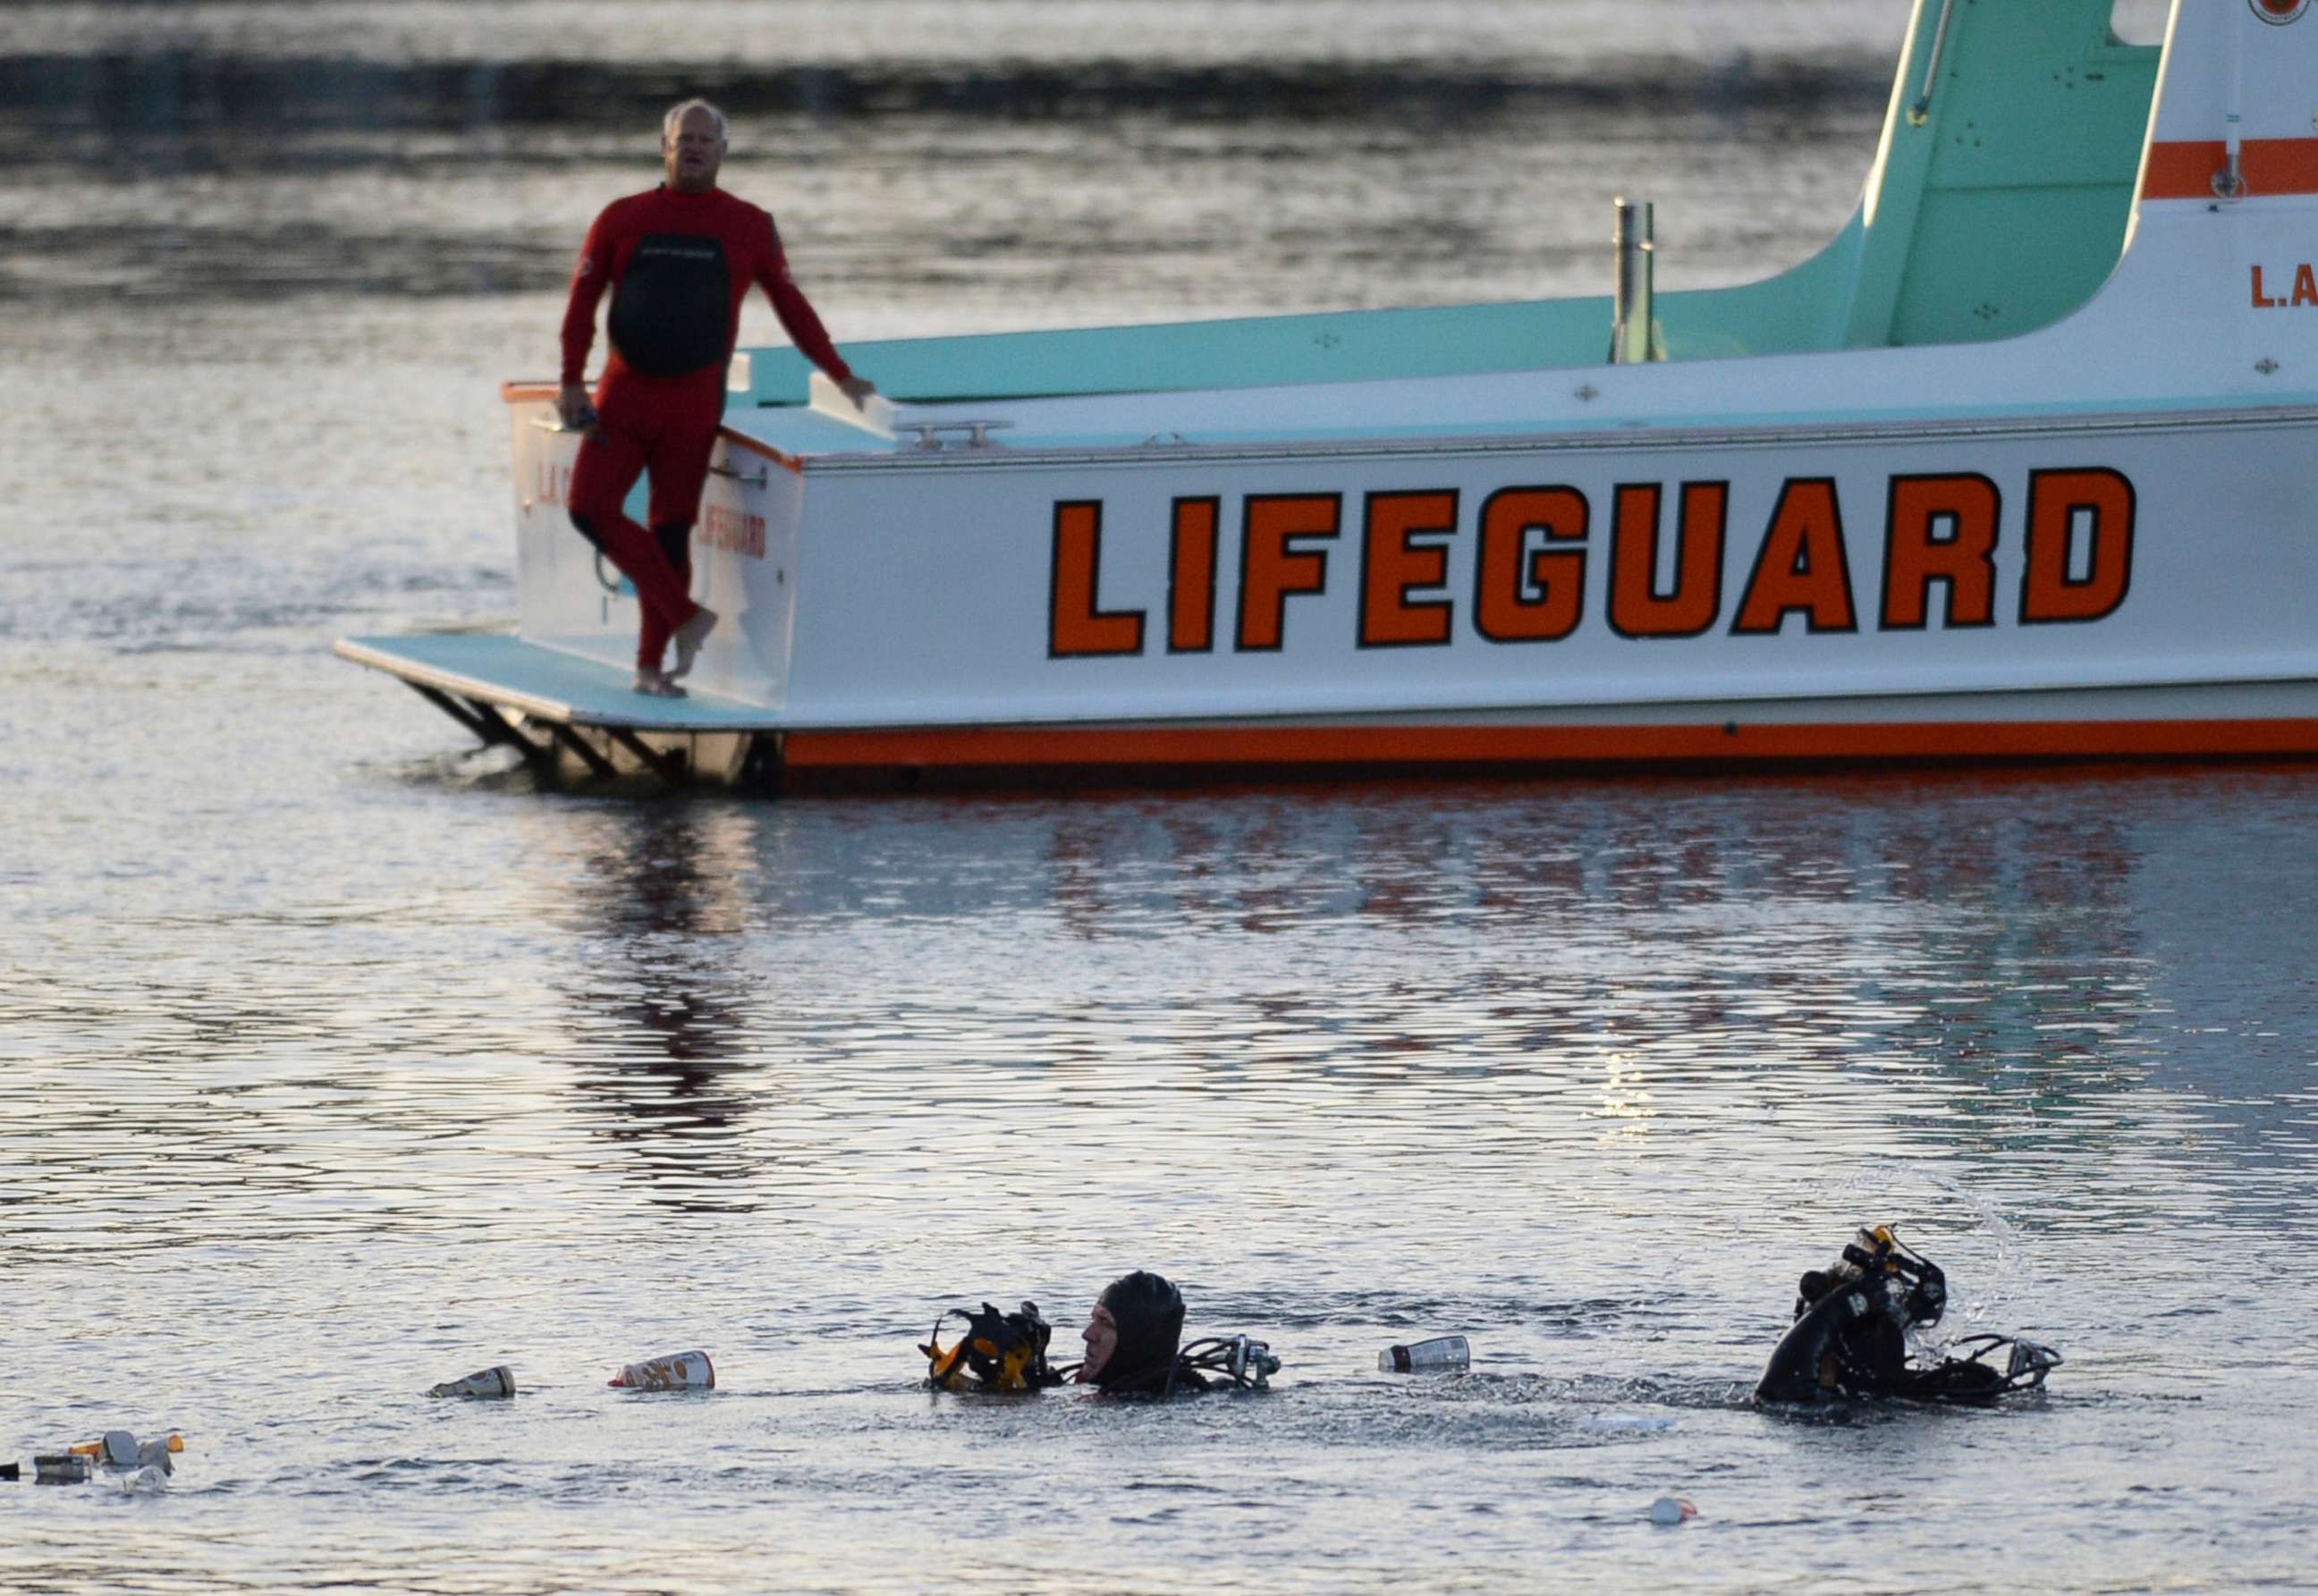 PHOTO: Divers emerge from the water as debris believed to be from a car floats to the surface, where a car went off a pier and into the water, in Los Angeles' San Pedro harbor district, April 9, 2015.